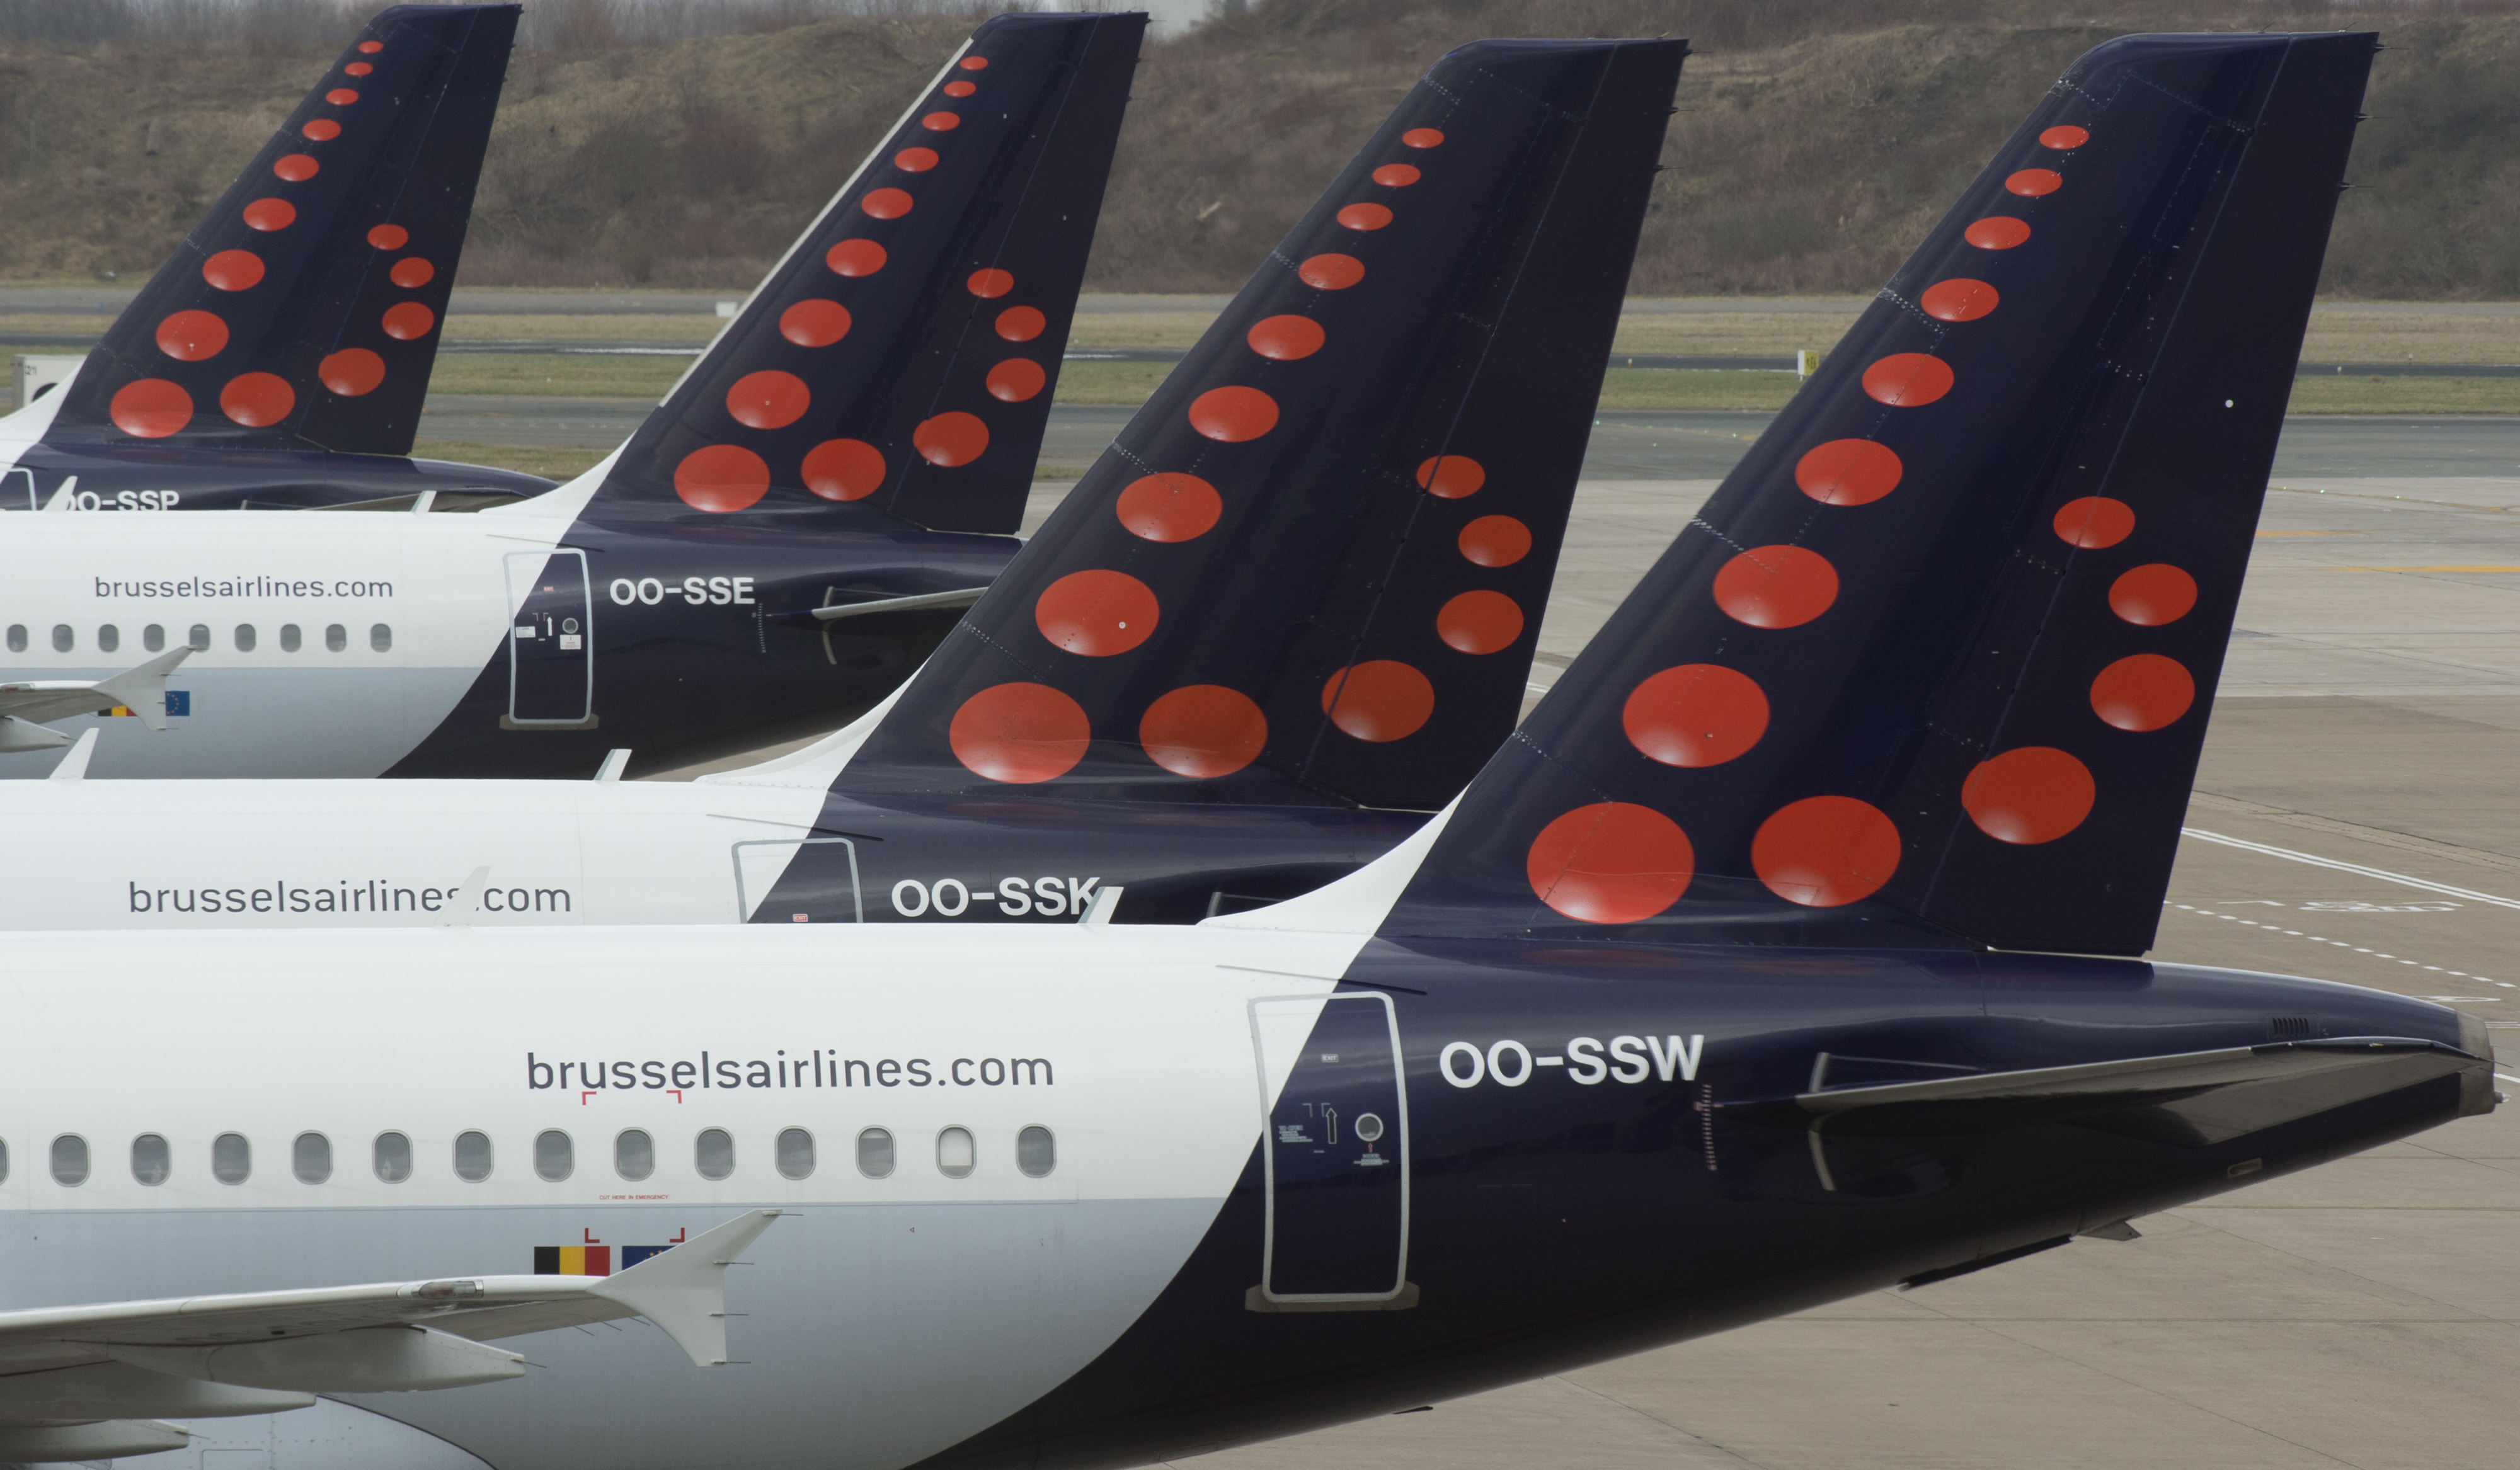 Brussels Airlines CEO Vranckx: ‘going for it 100%’